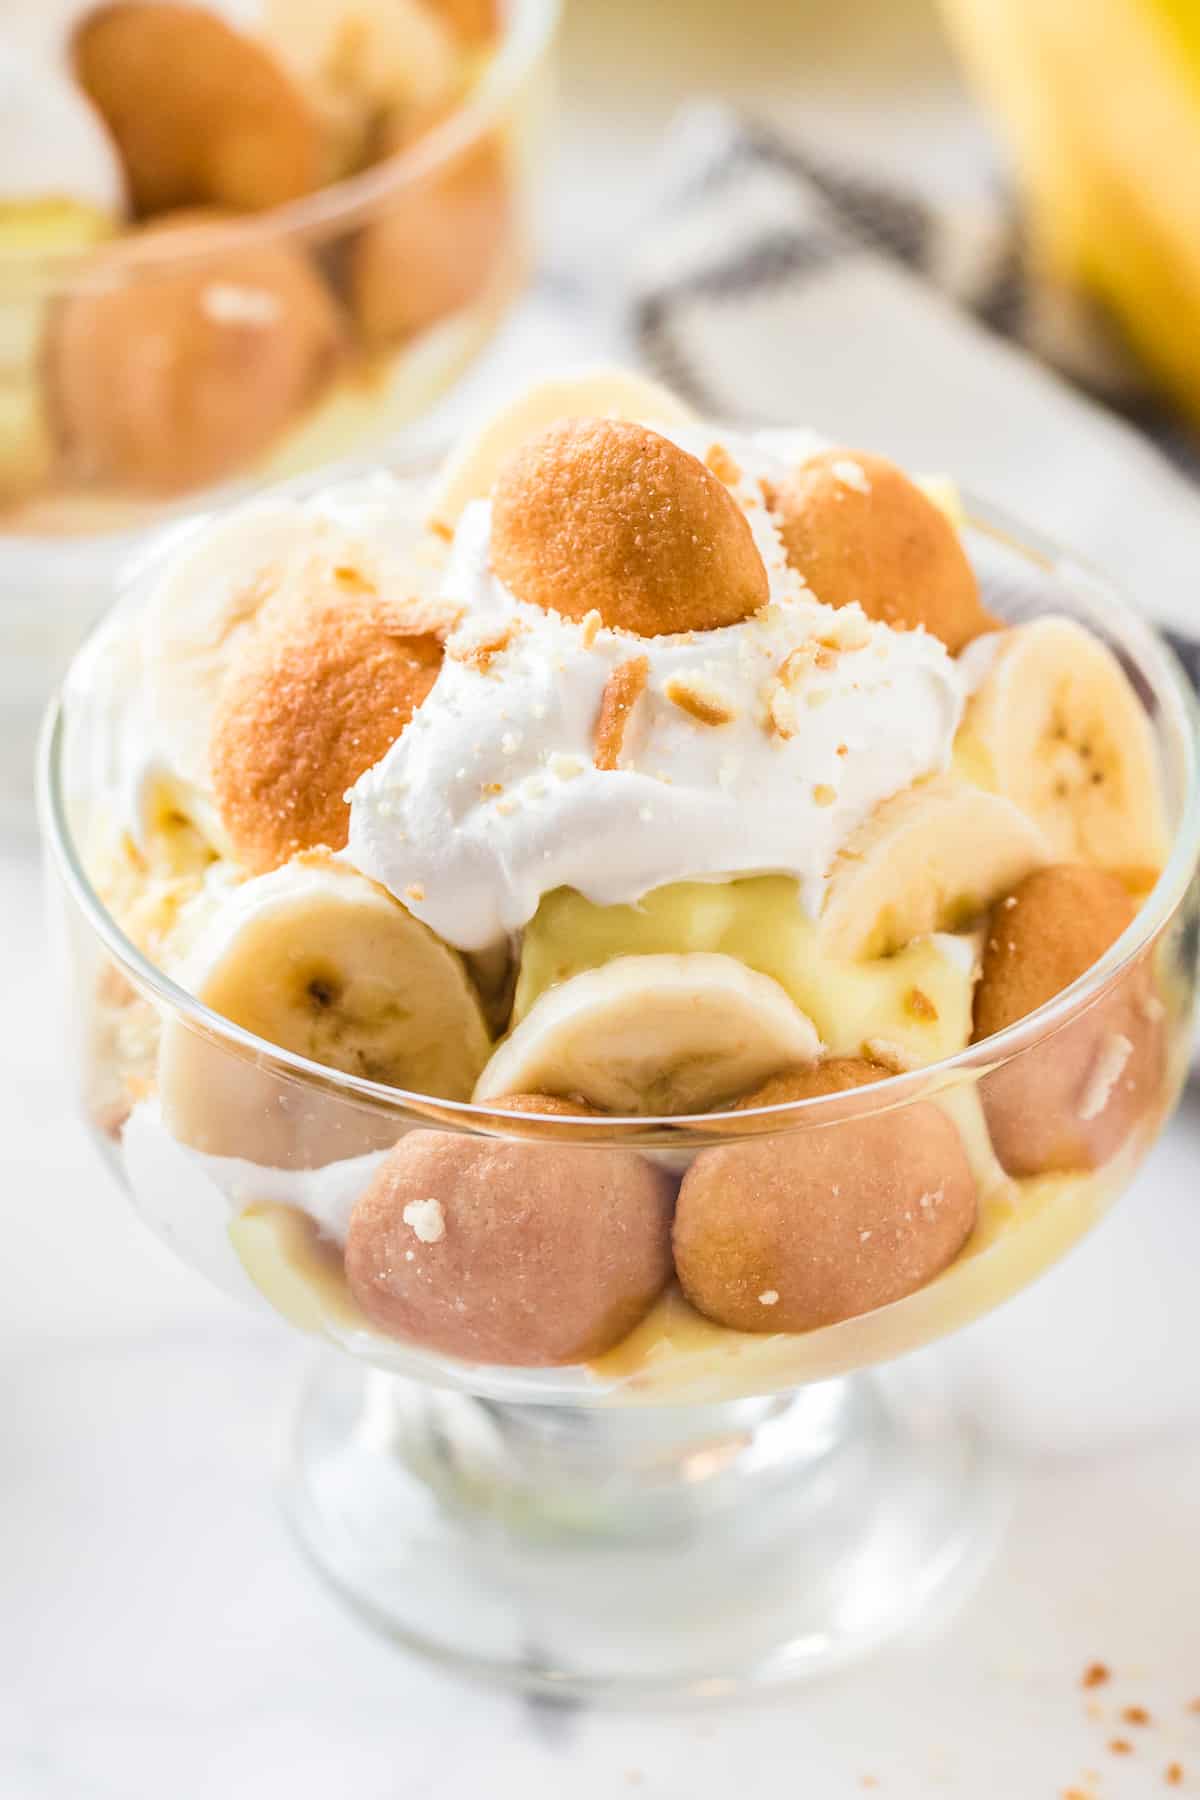 Hershey's Ice Cream - Banana Pudding is a fan favorite! Try it